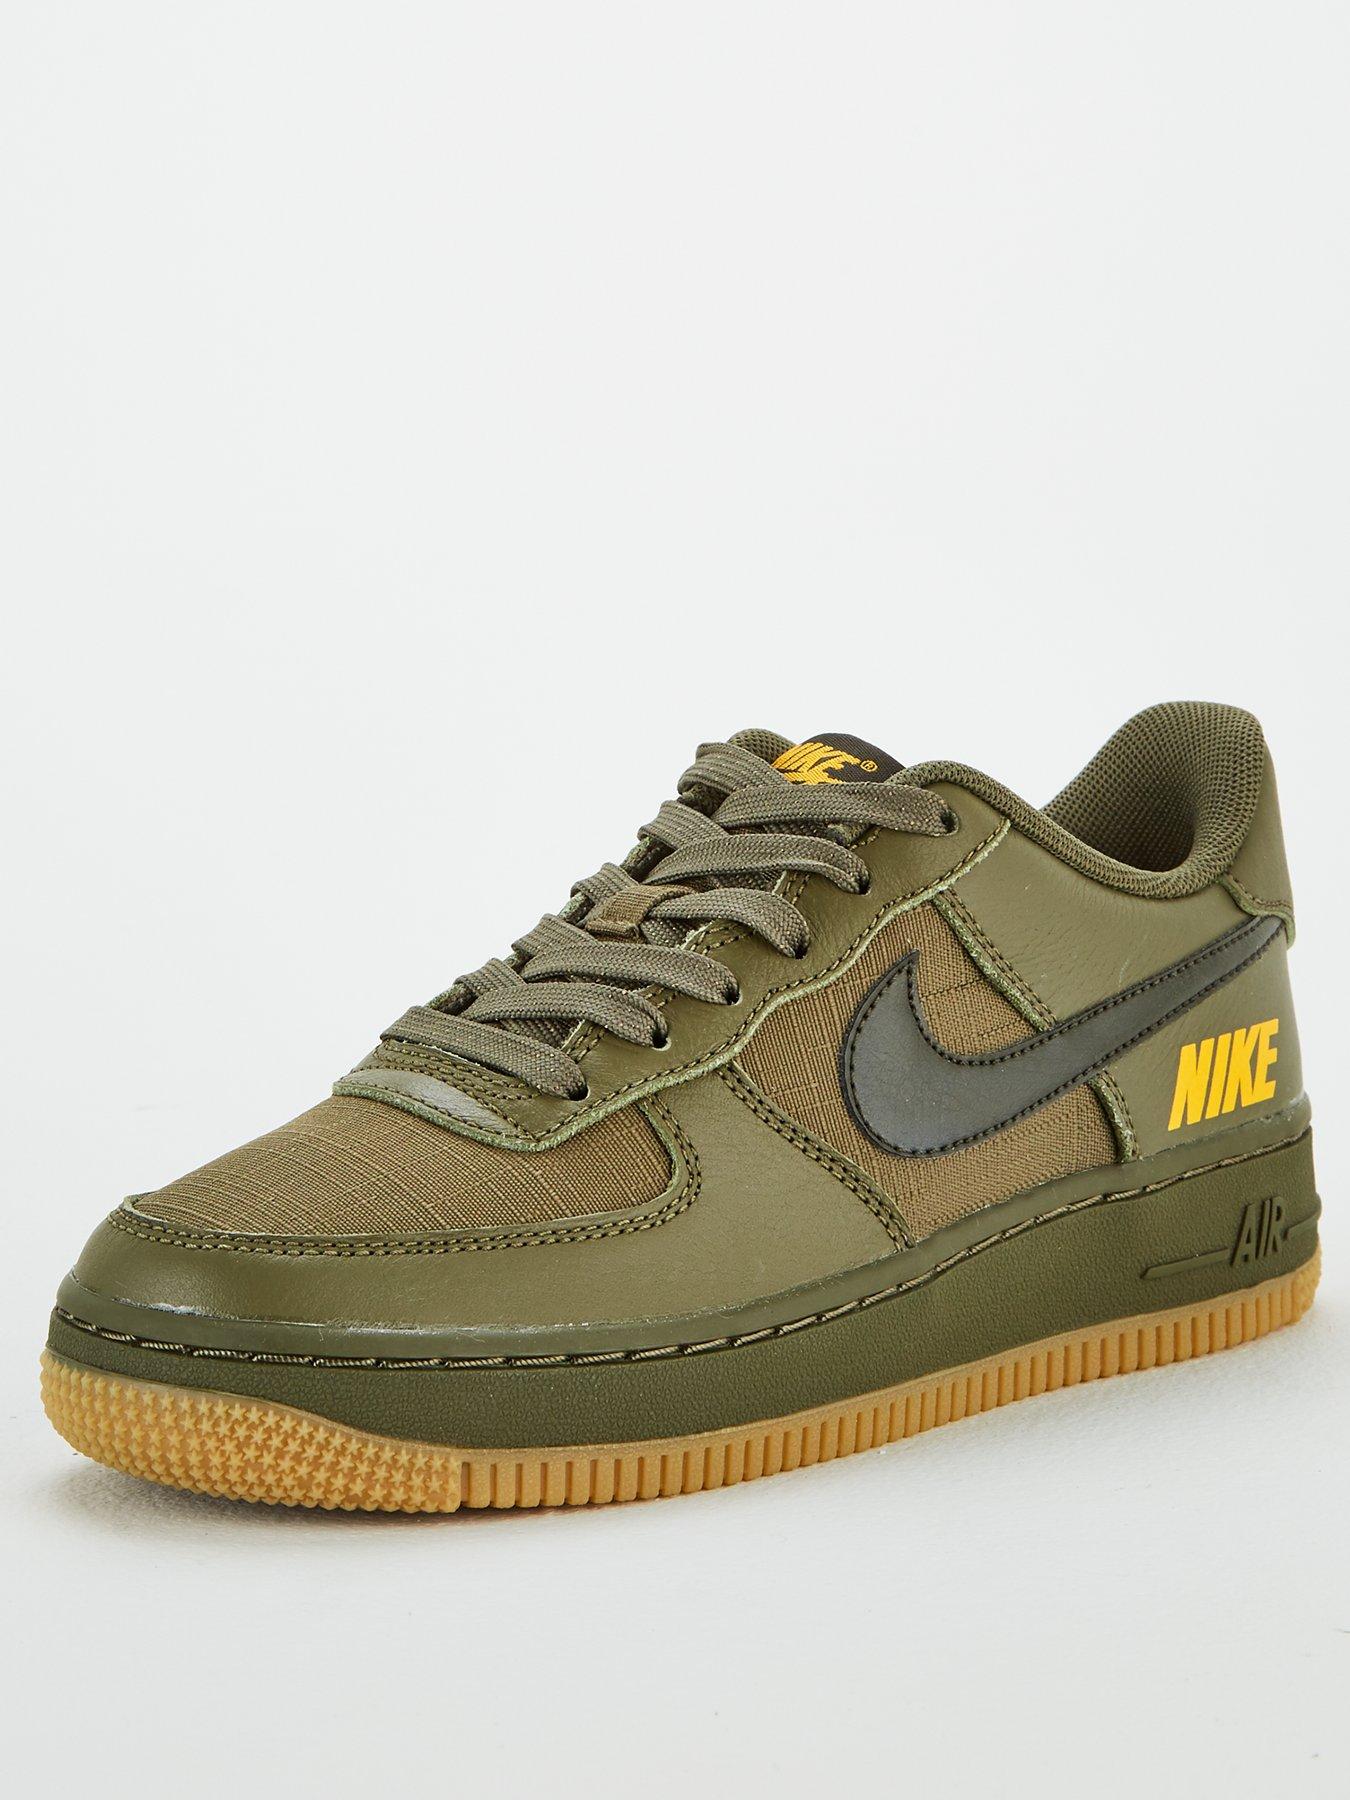 air force 1 junior size 5